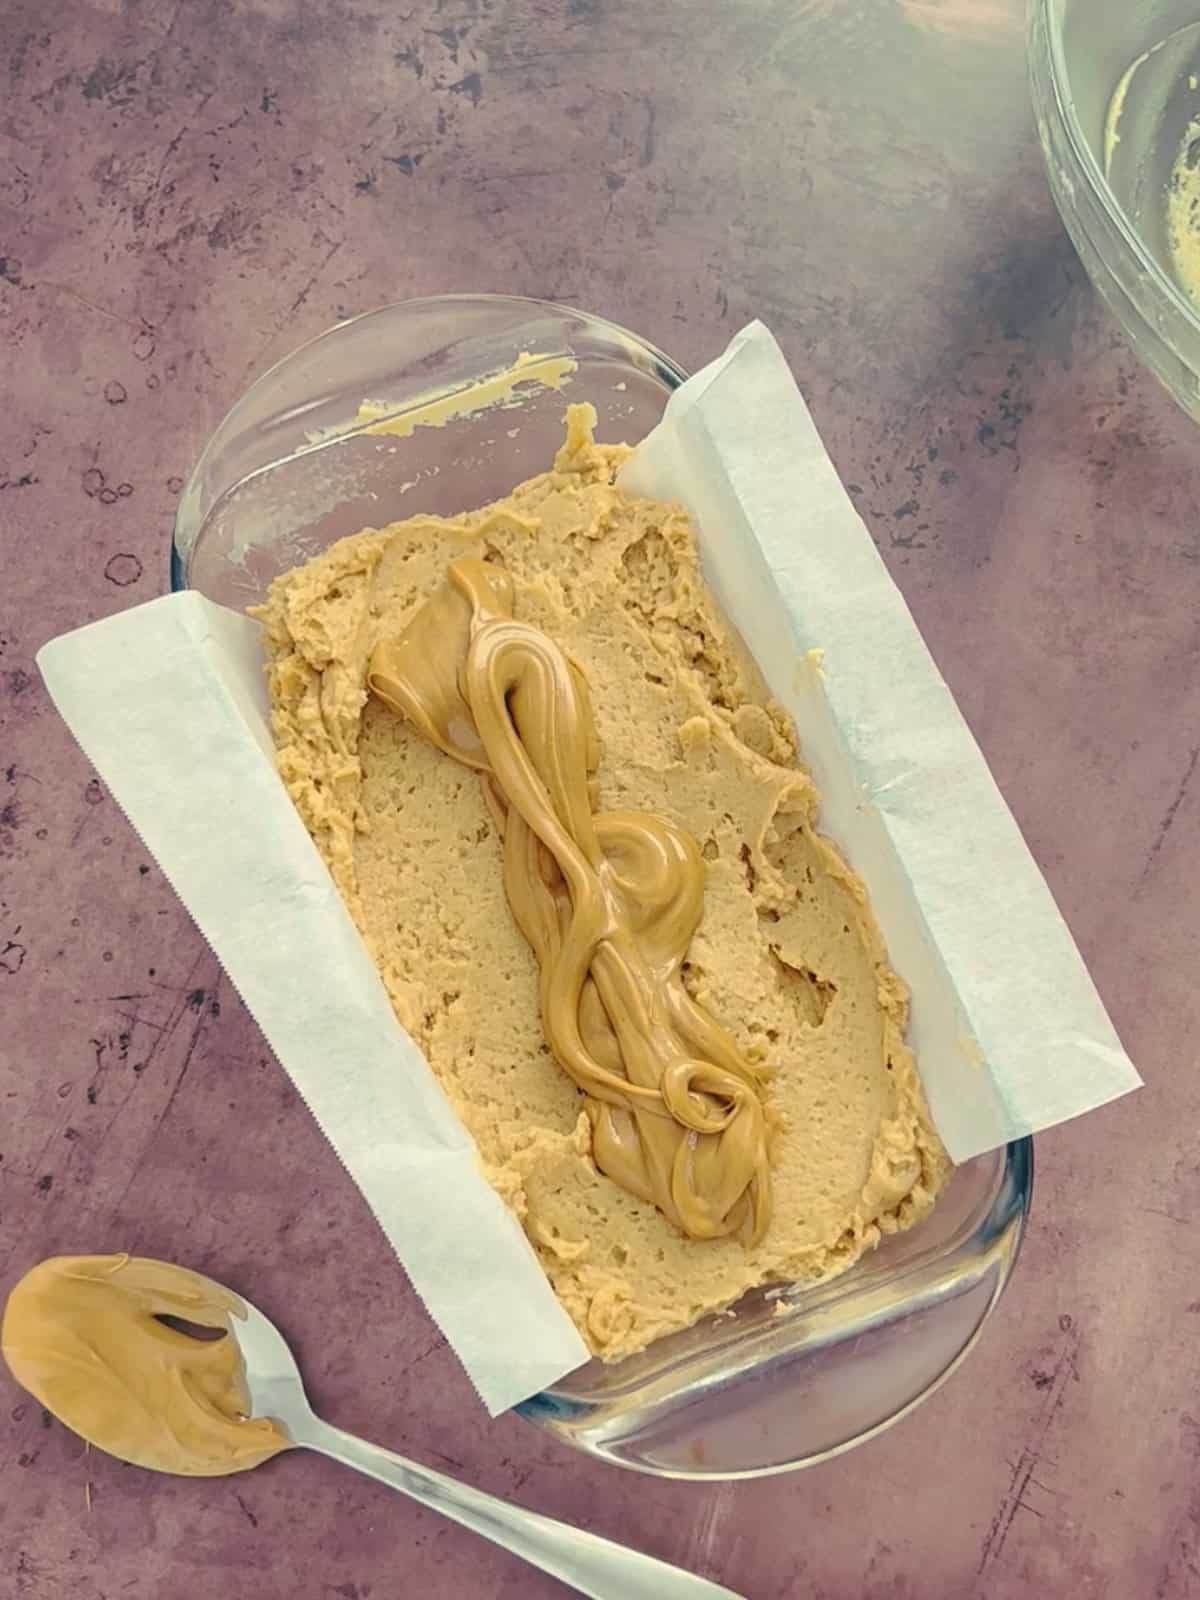 peanut butter bread batter in the loaf pan, topped with slightly melted peanut butter.